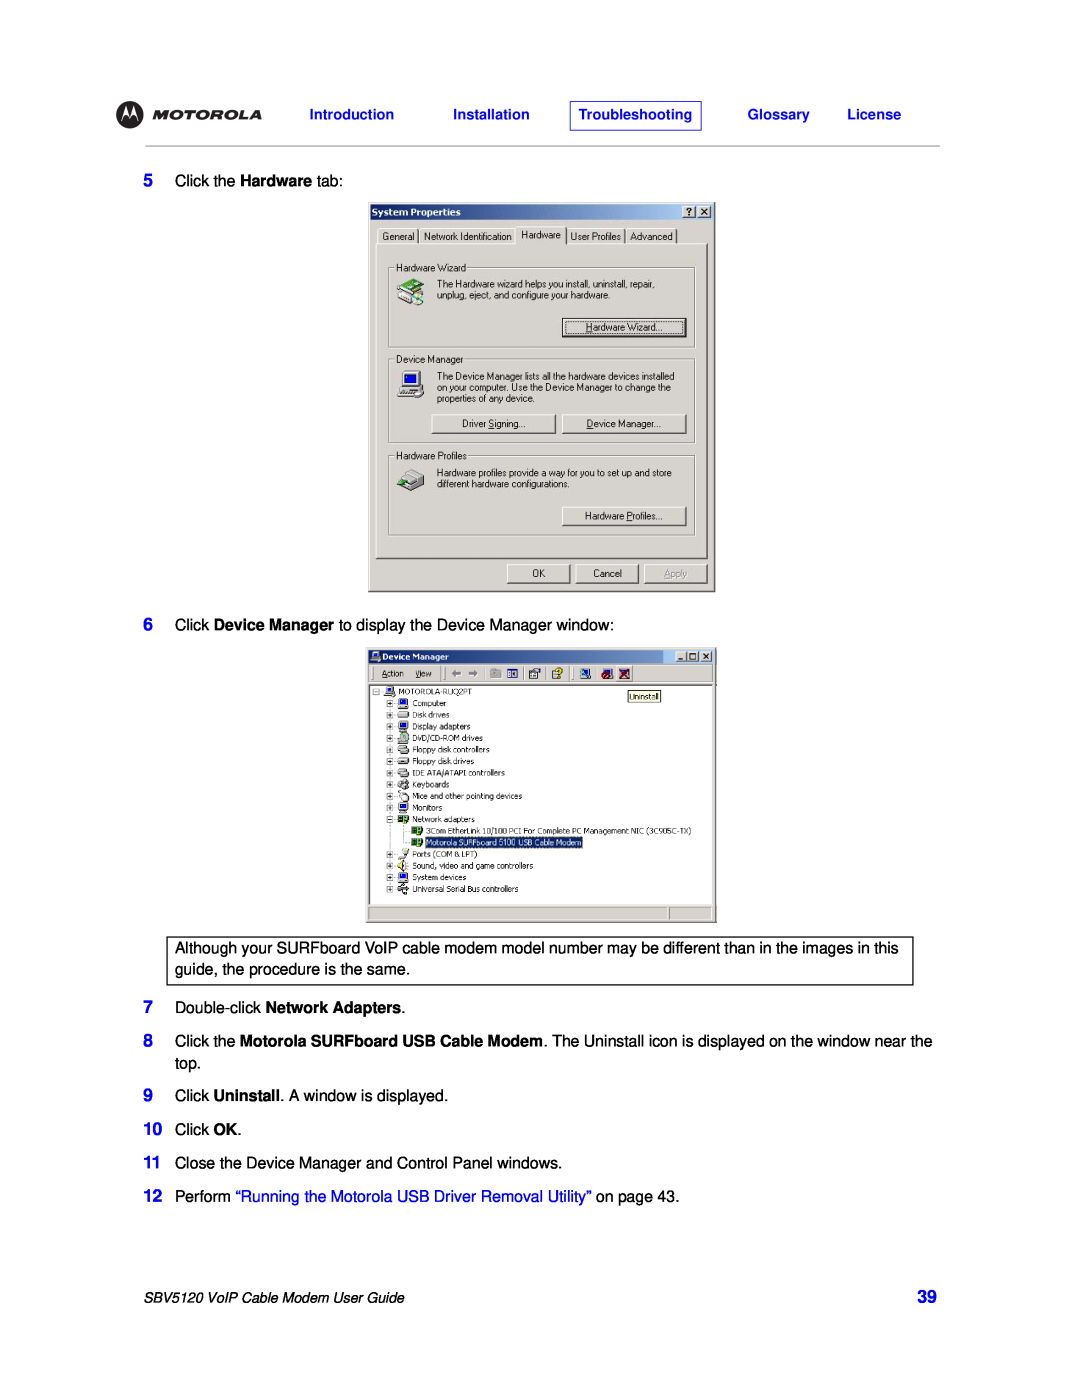 Motorola SBV5120 manual Double-click Network Adapters, Perform “Running the Motorola USB Driver Removal Utility” on page 